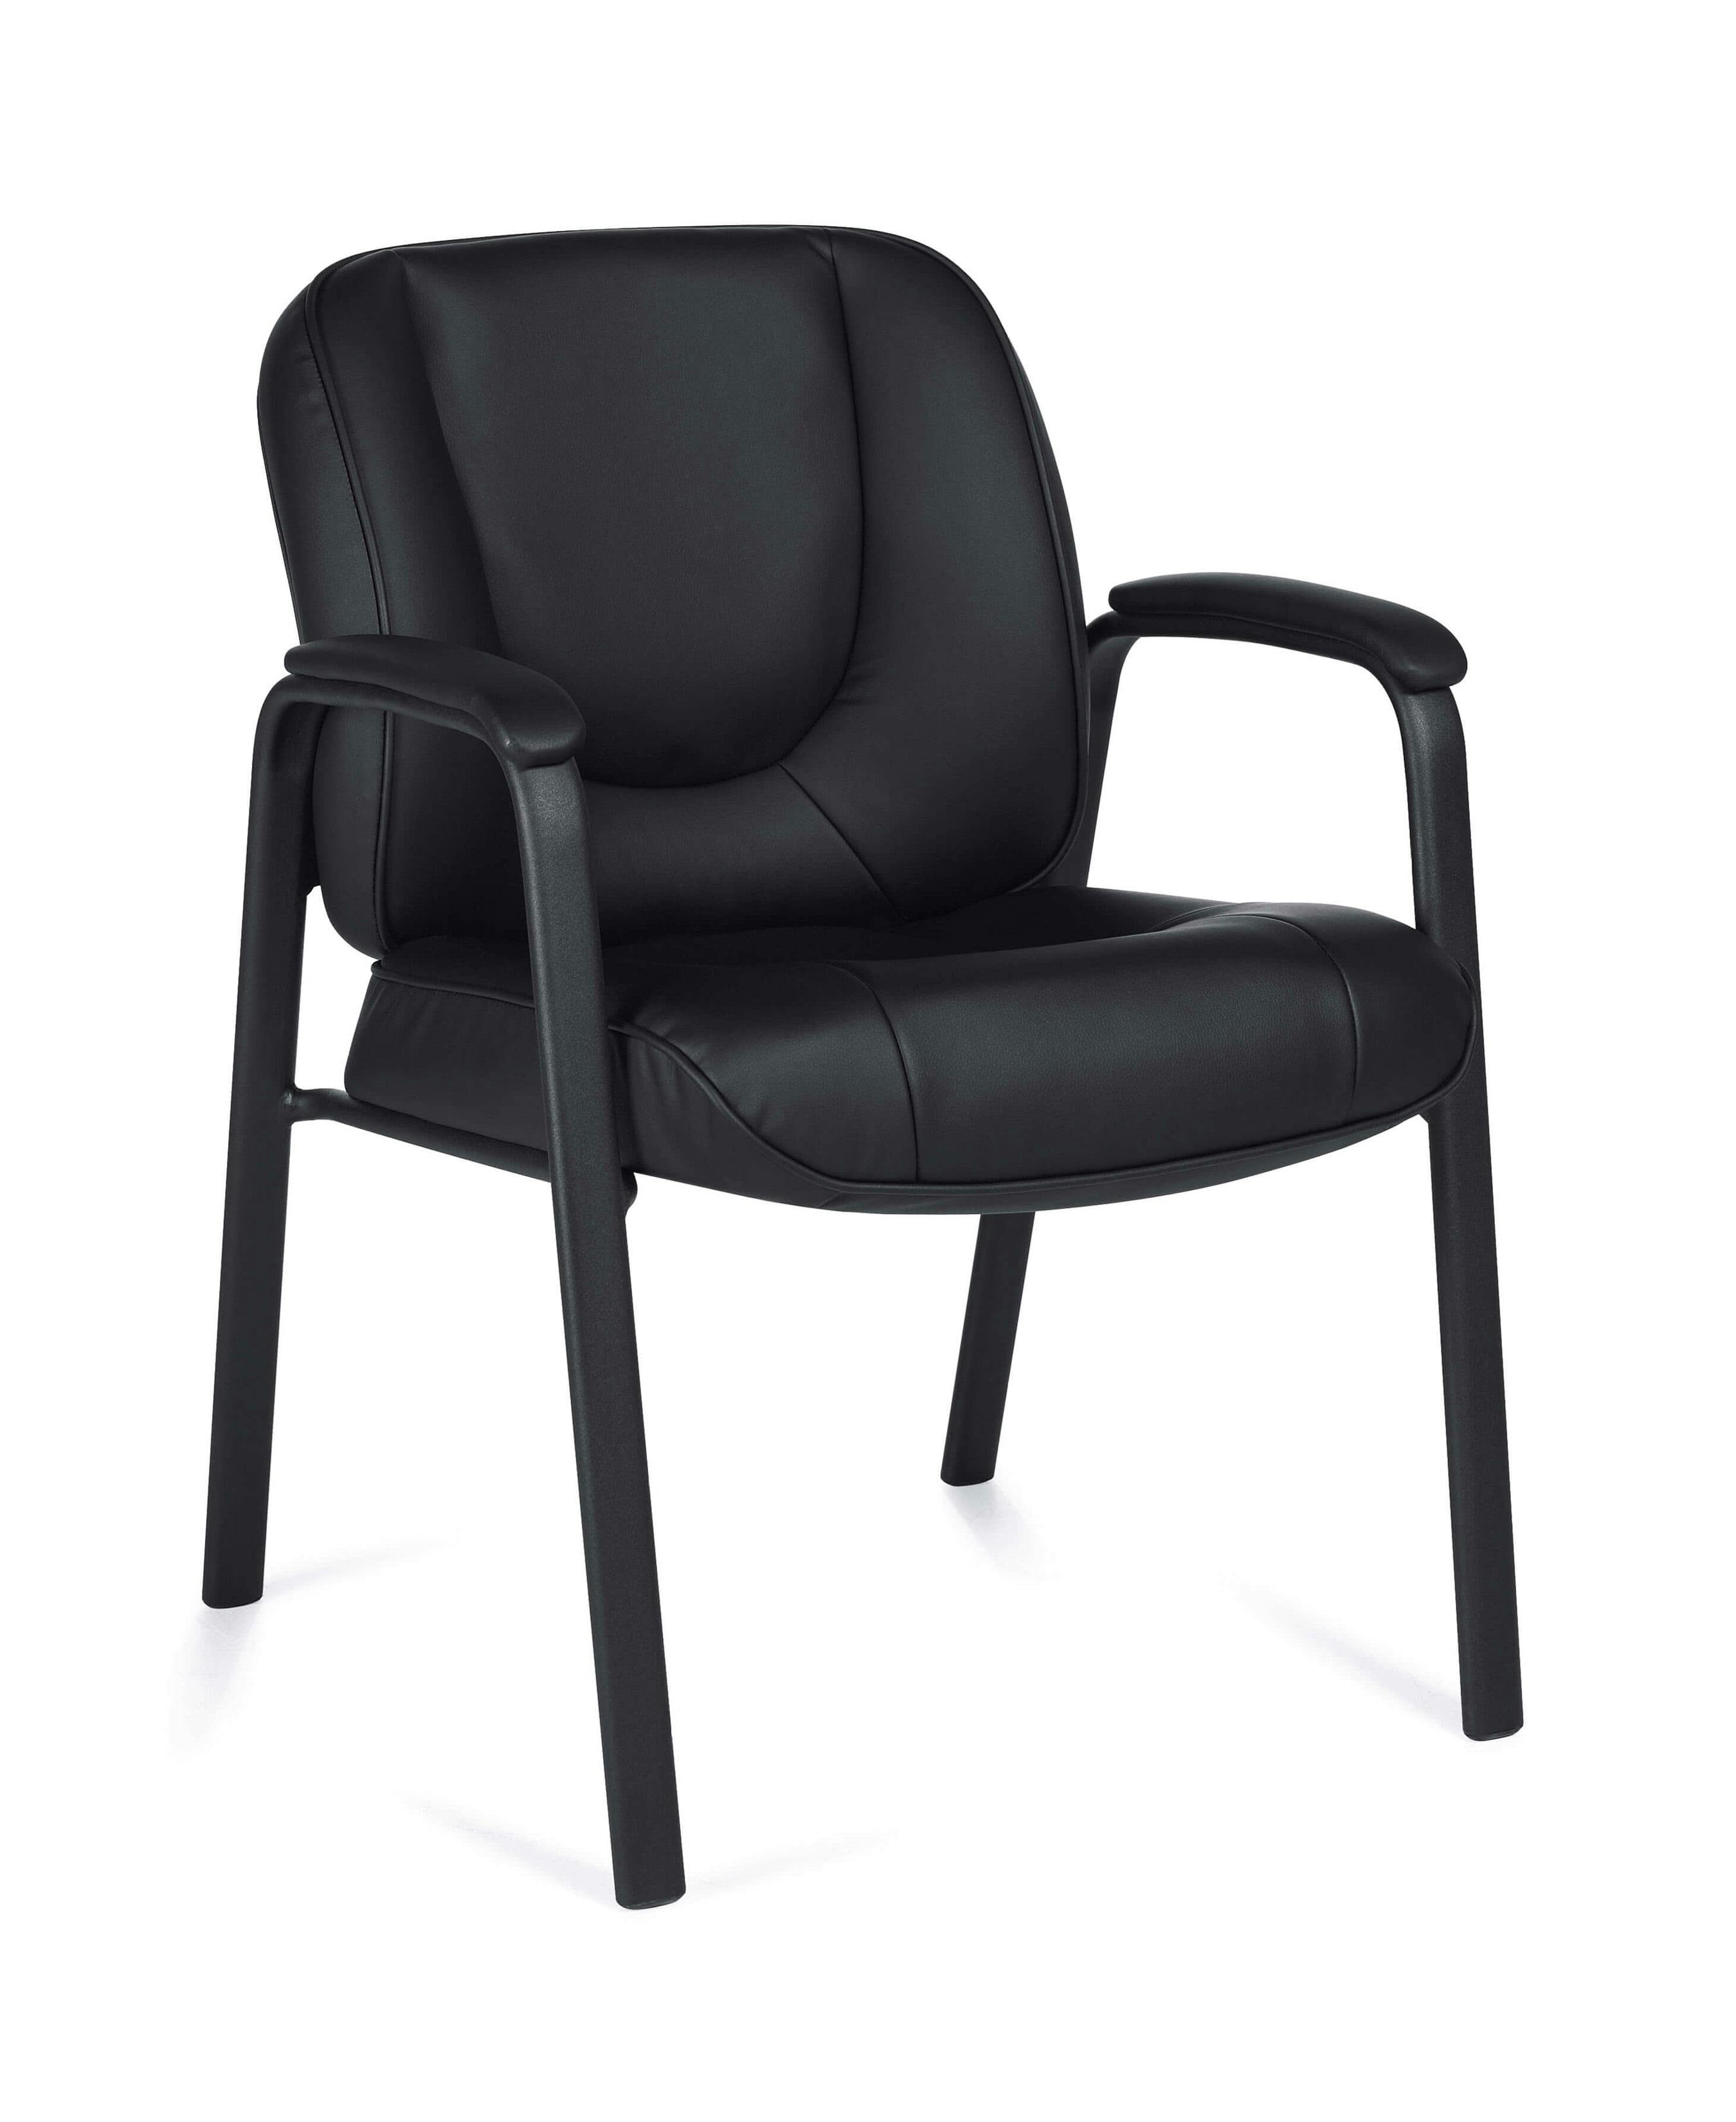 Lucia Black Bonded Leather Visitor Chair with Steel Frame